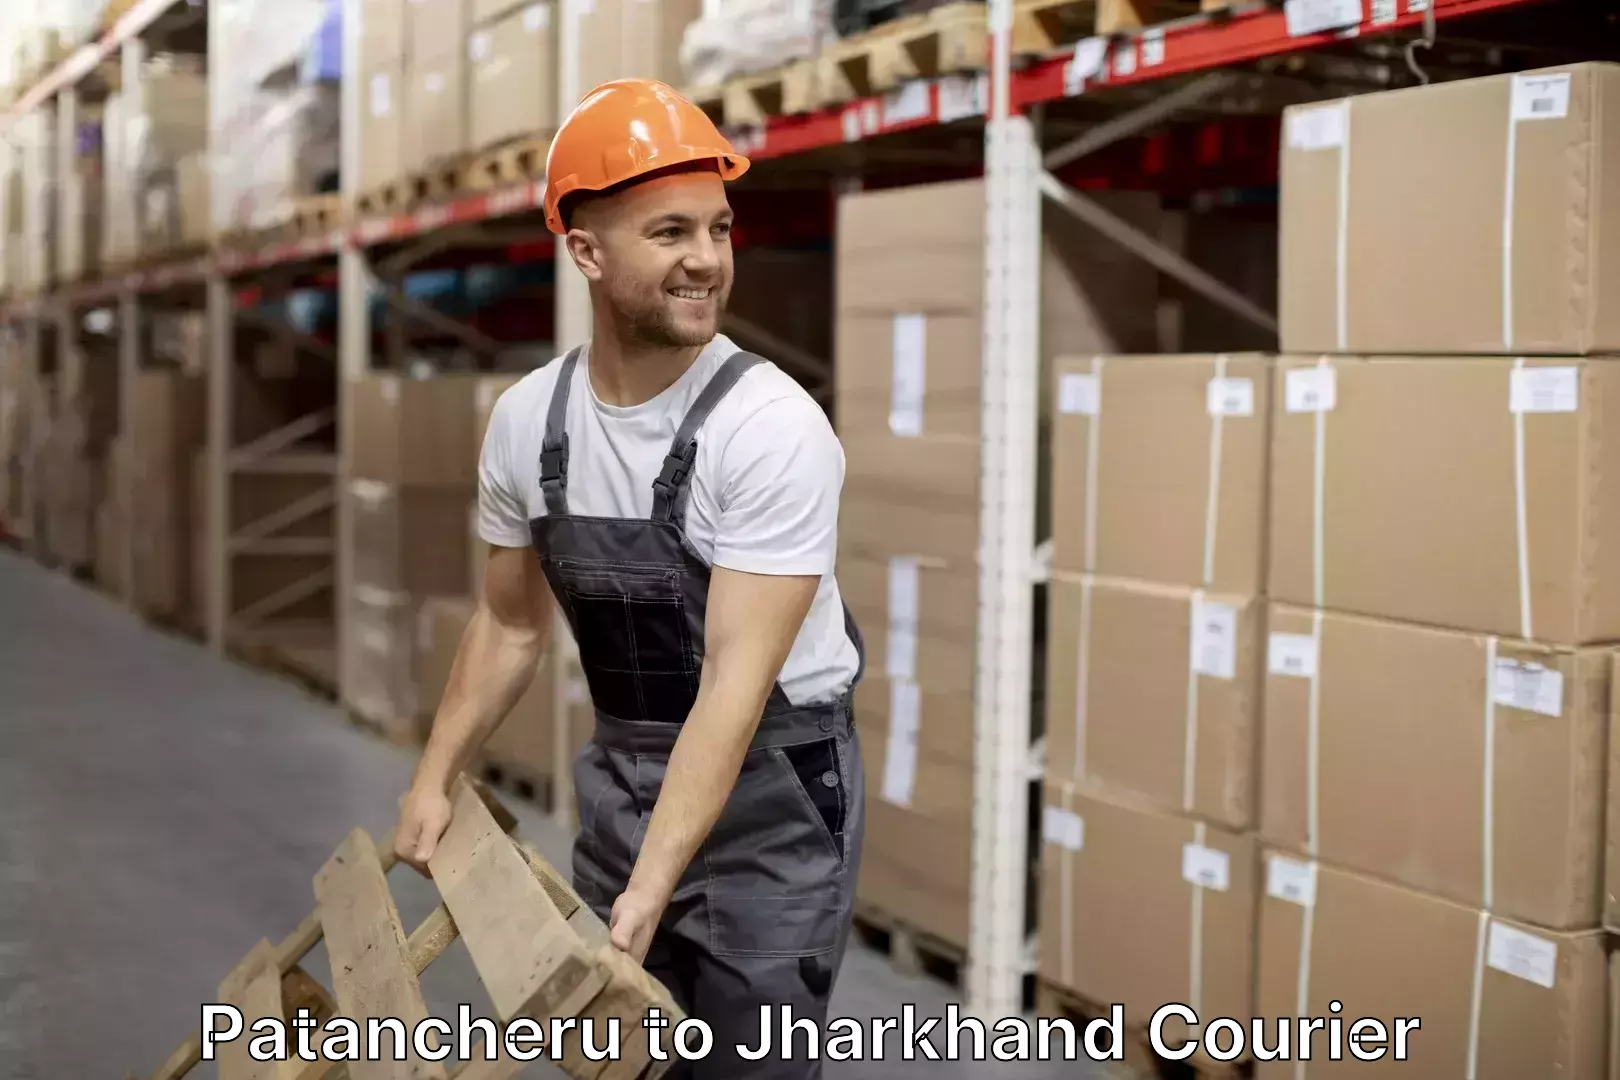 Furniture delivery service Patancheru to Jharkhand